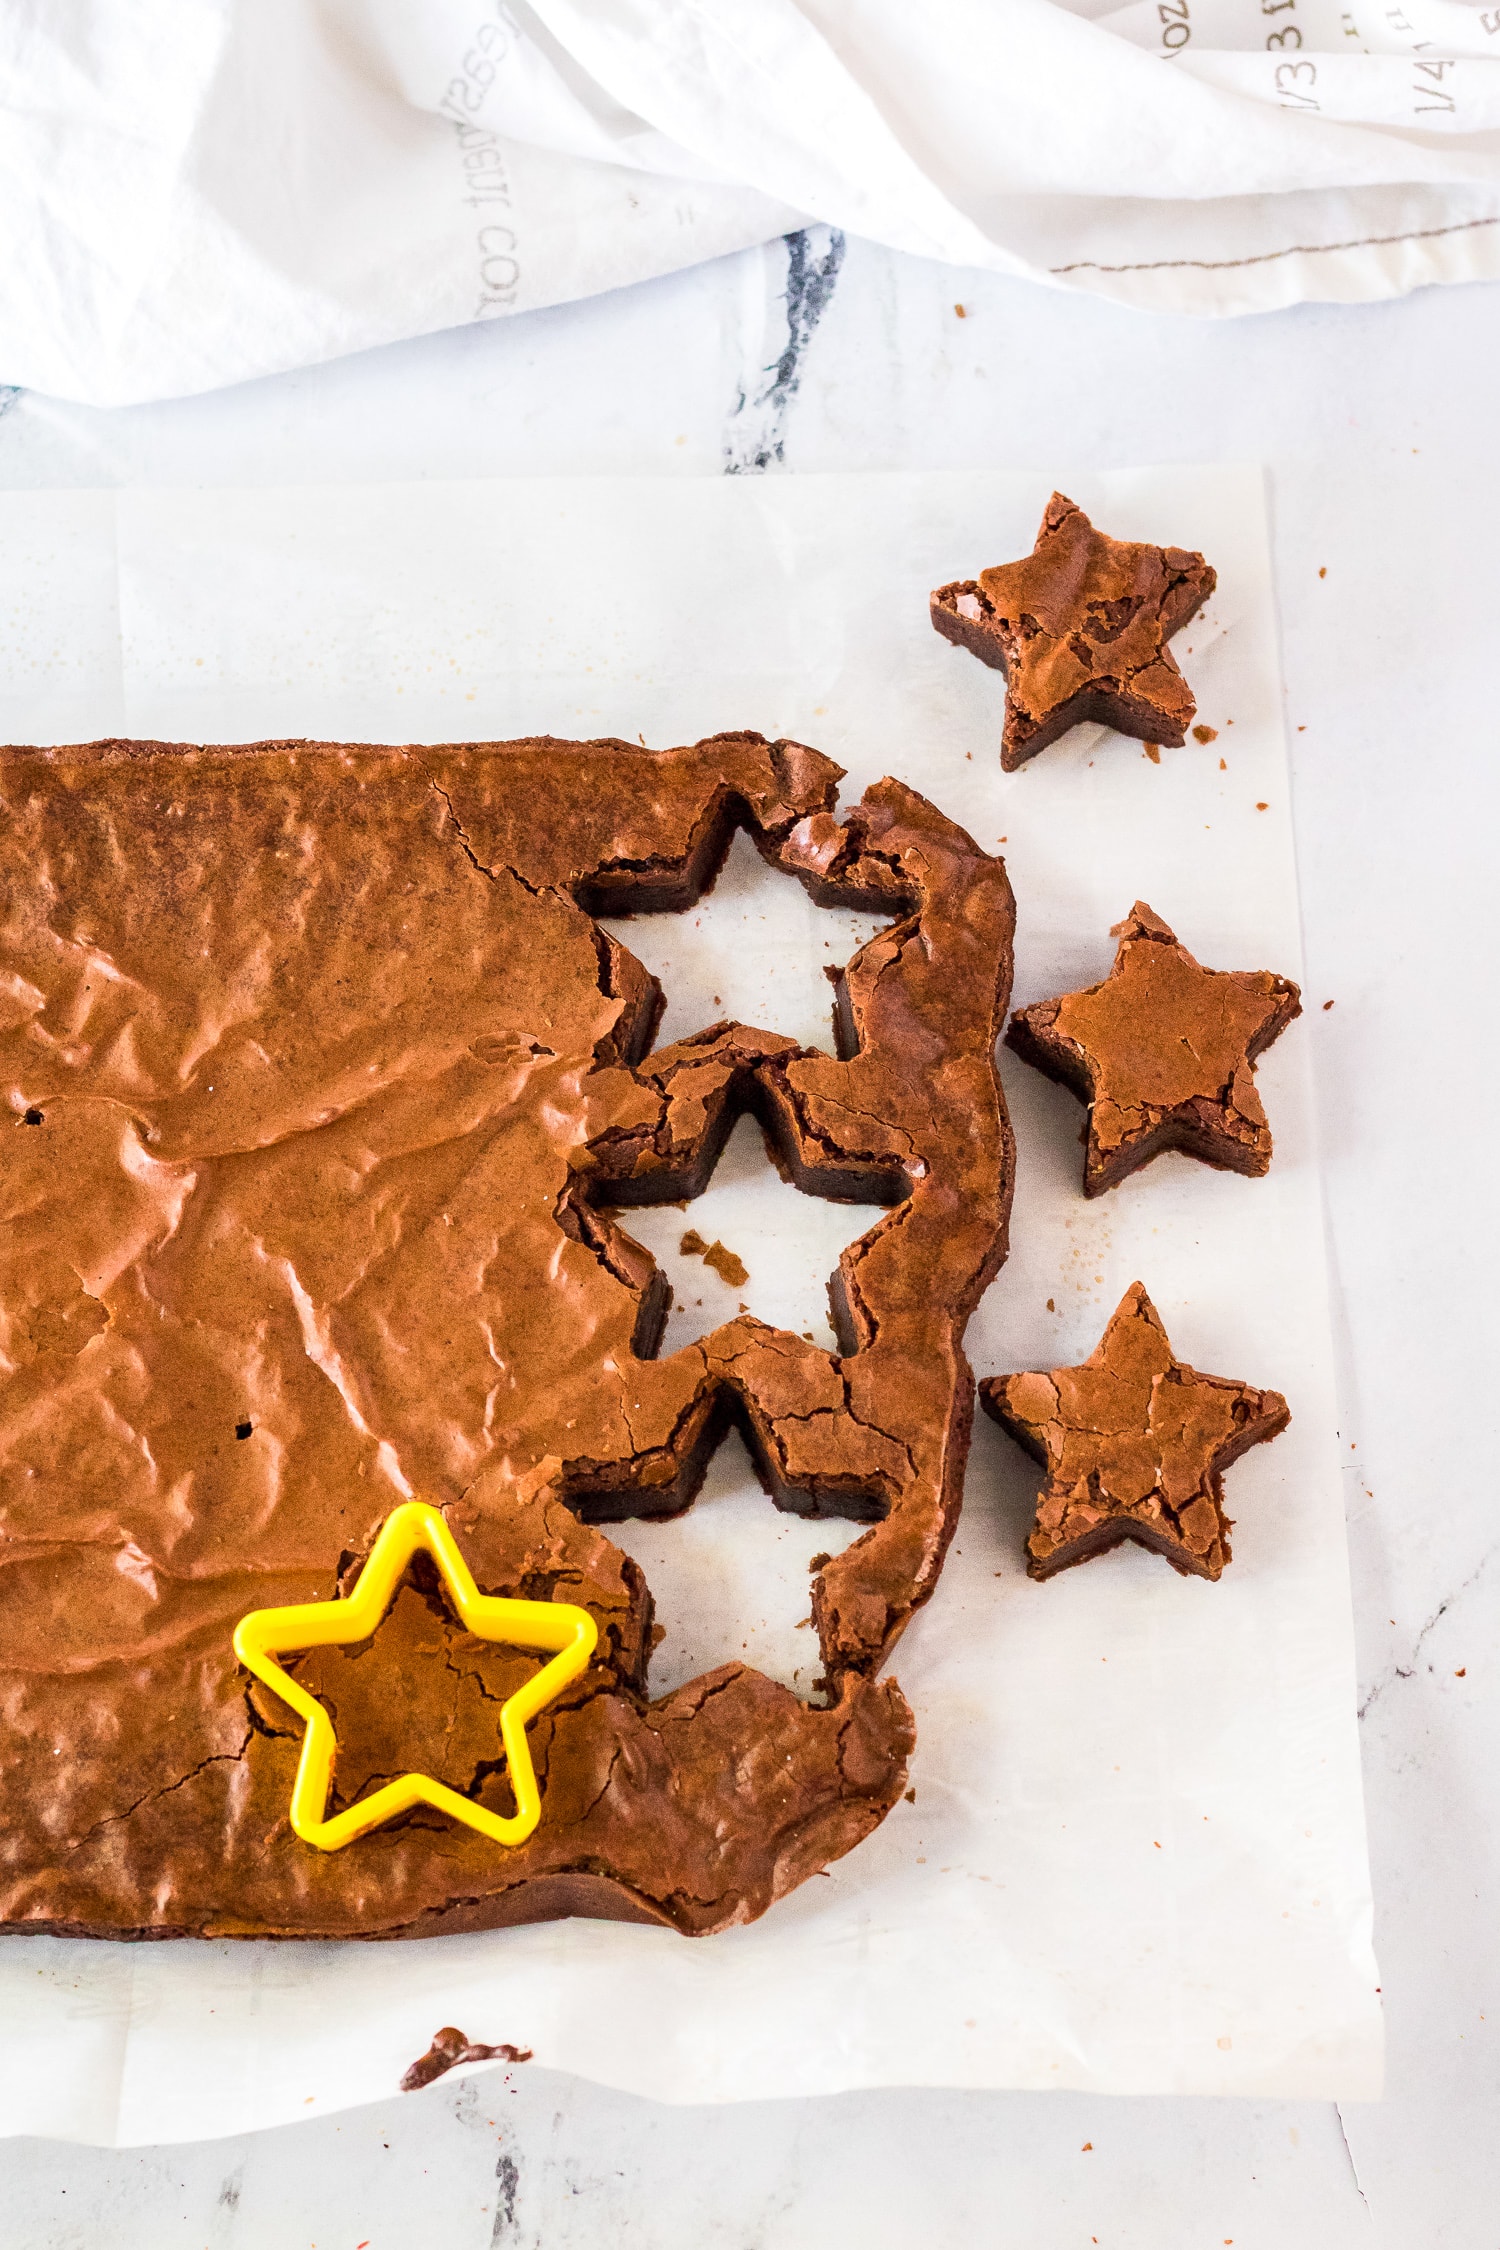 Cutting stars out of brownies